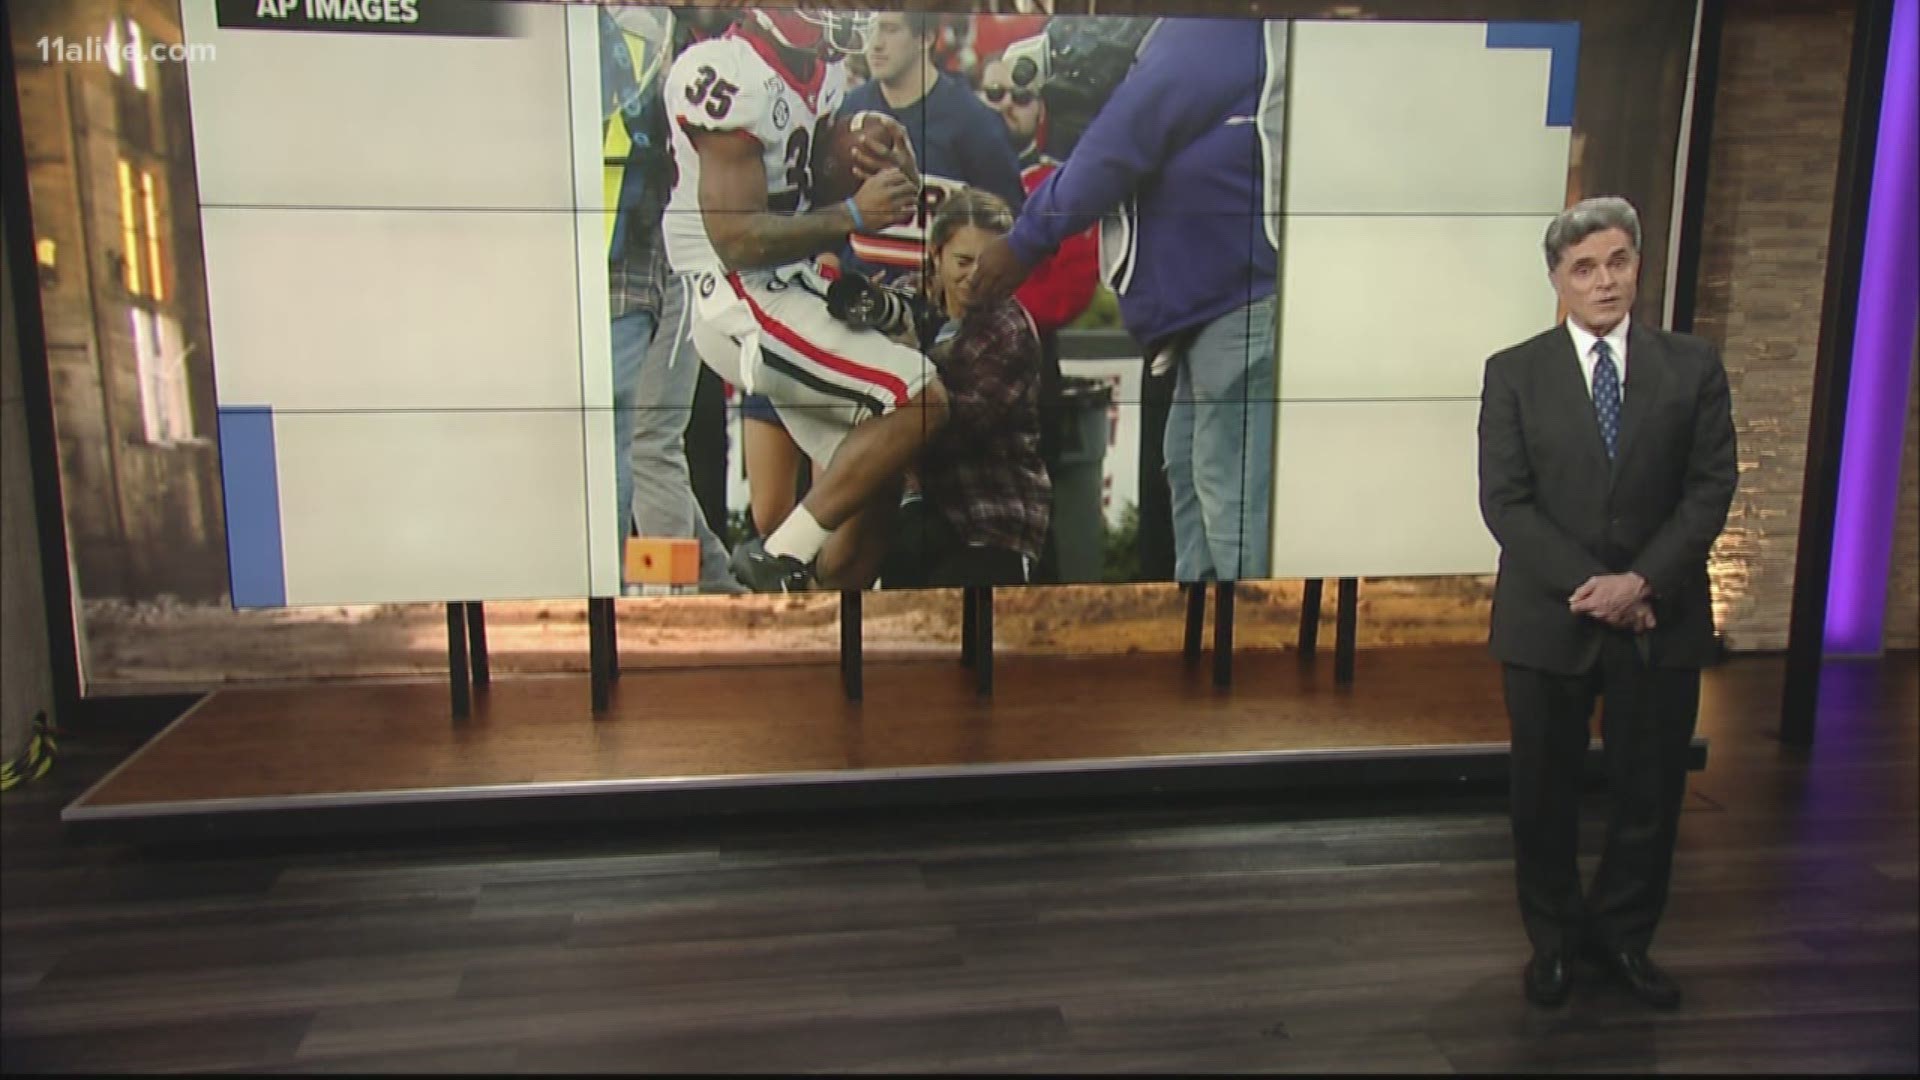 A photography intern for the University of Georgia Athletic Association, the Georgia graduate was hurt when Bulldogs running back Brian Herrien ran into her on sever